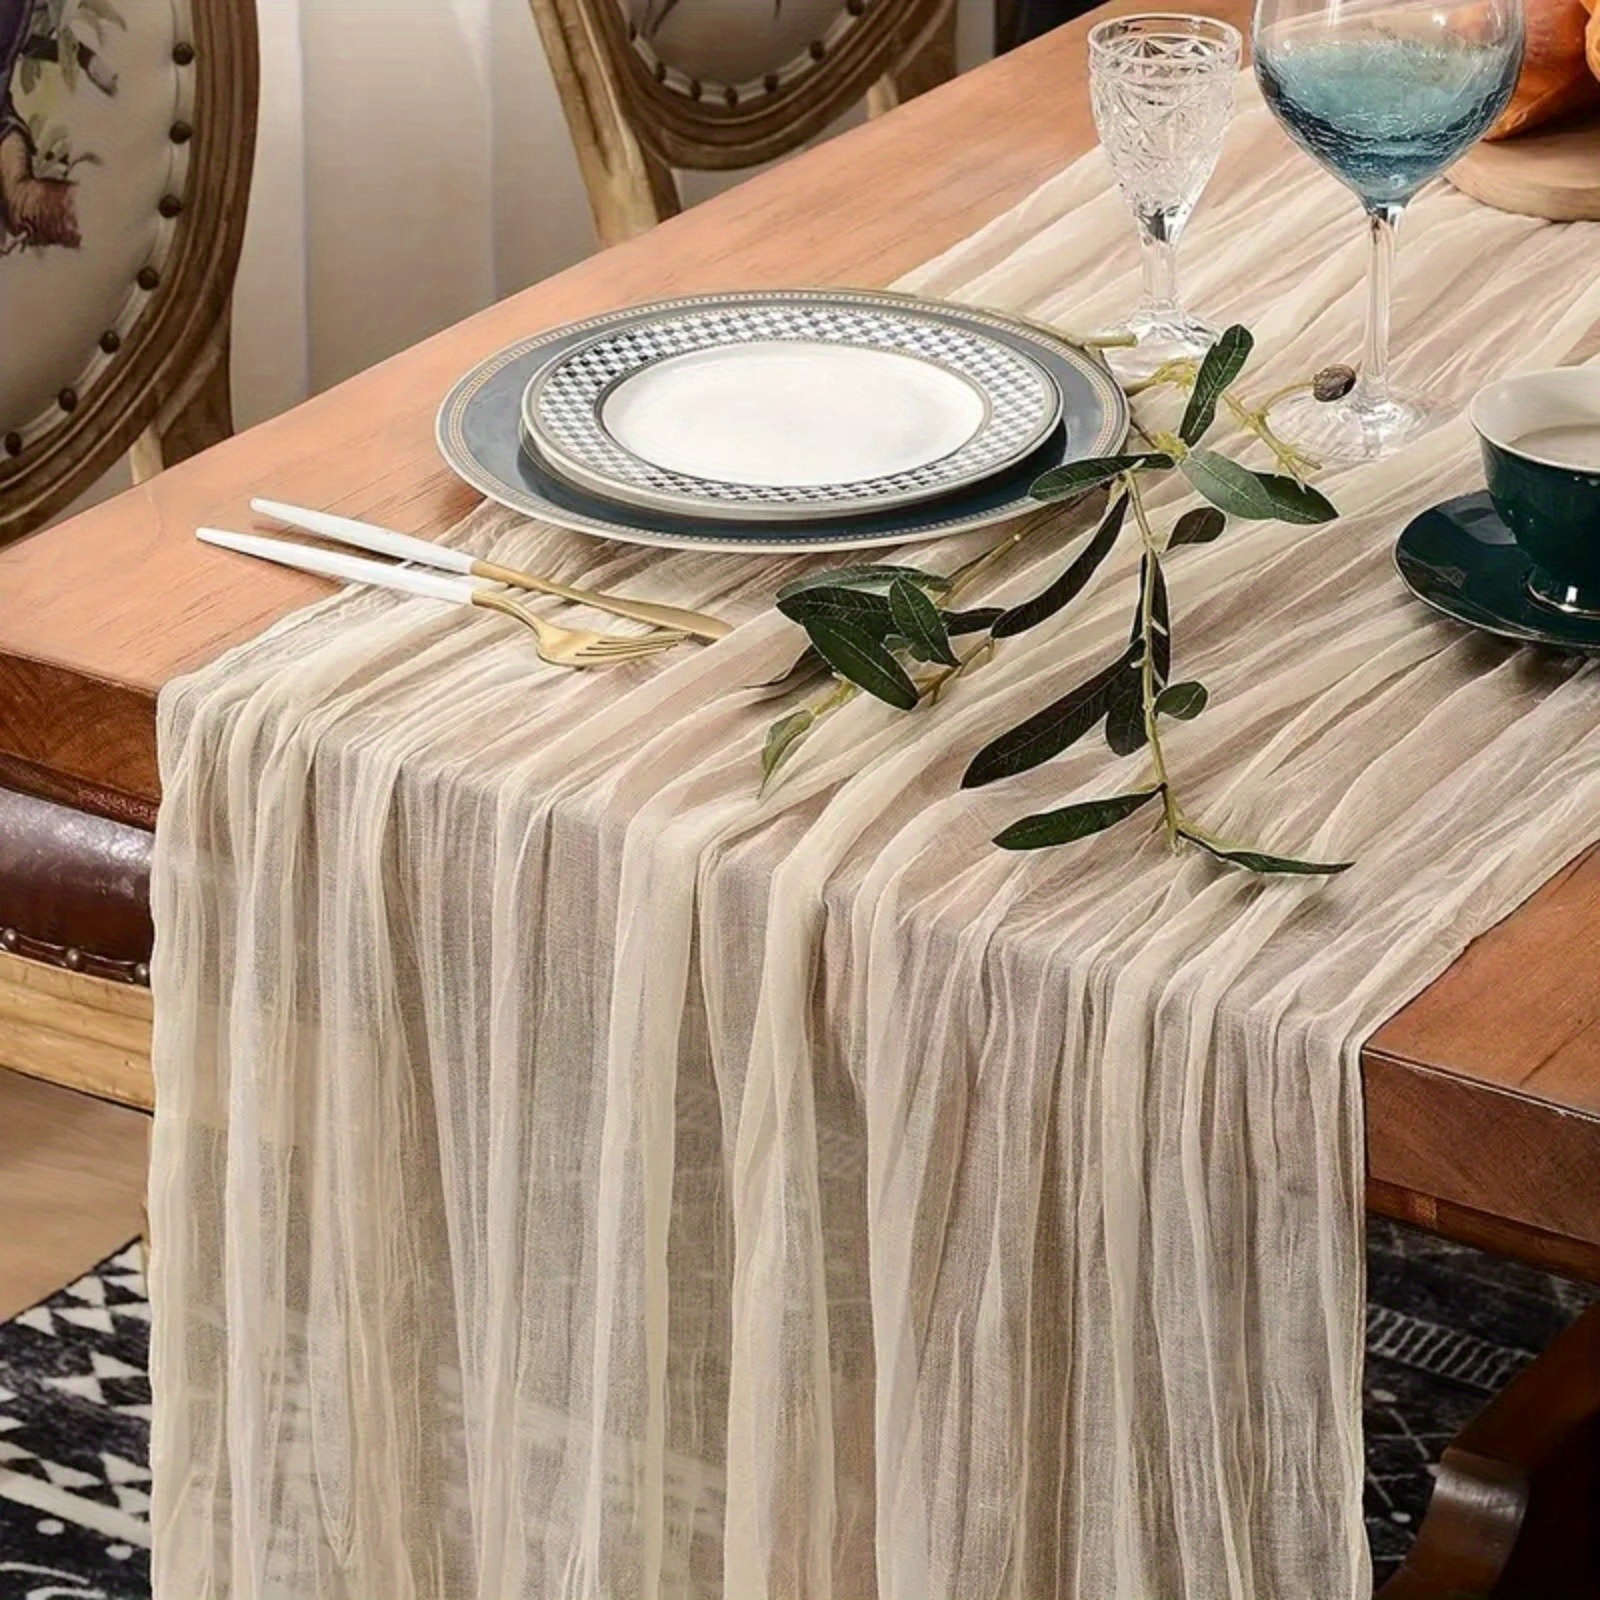 

1pc Boho Style Cheesecloth Table Runner - Long Gauze Sheer Romantictable Runner For Weddings, Bridal Showers, Holidays - Perfect For Homedecor And Father's Day